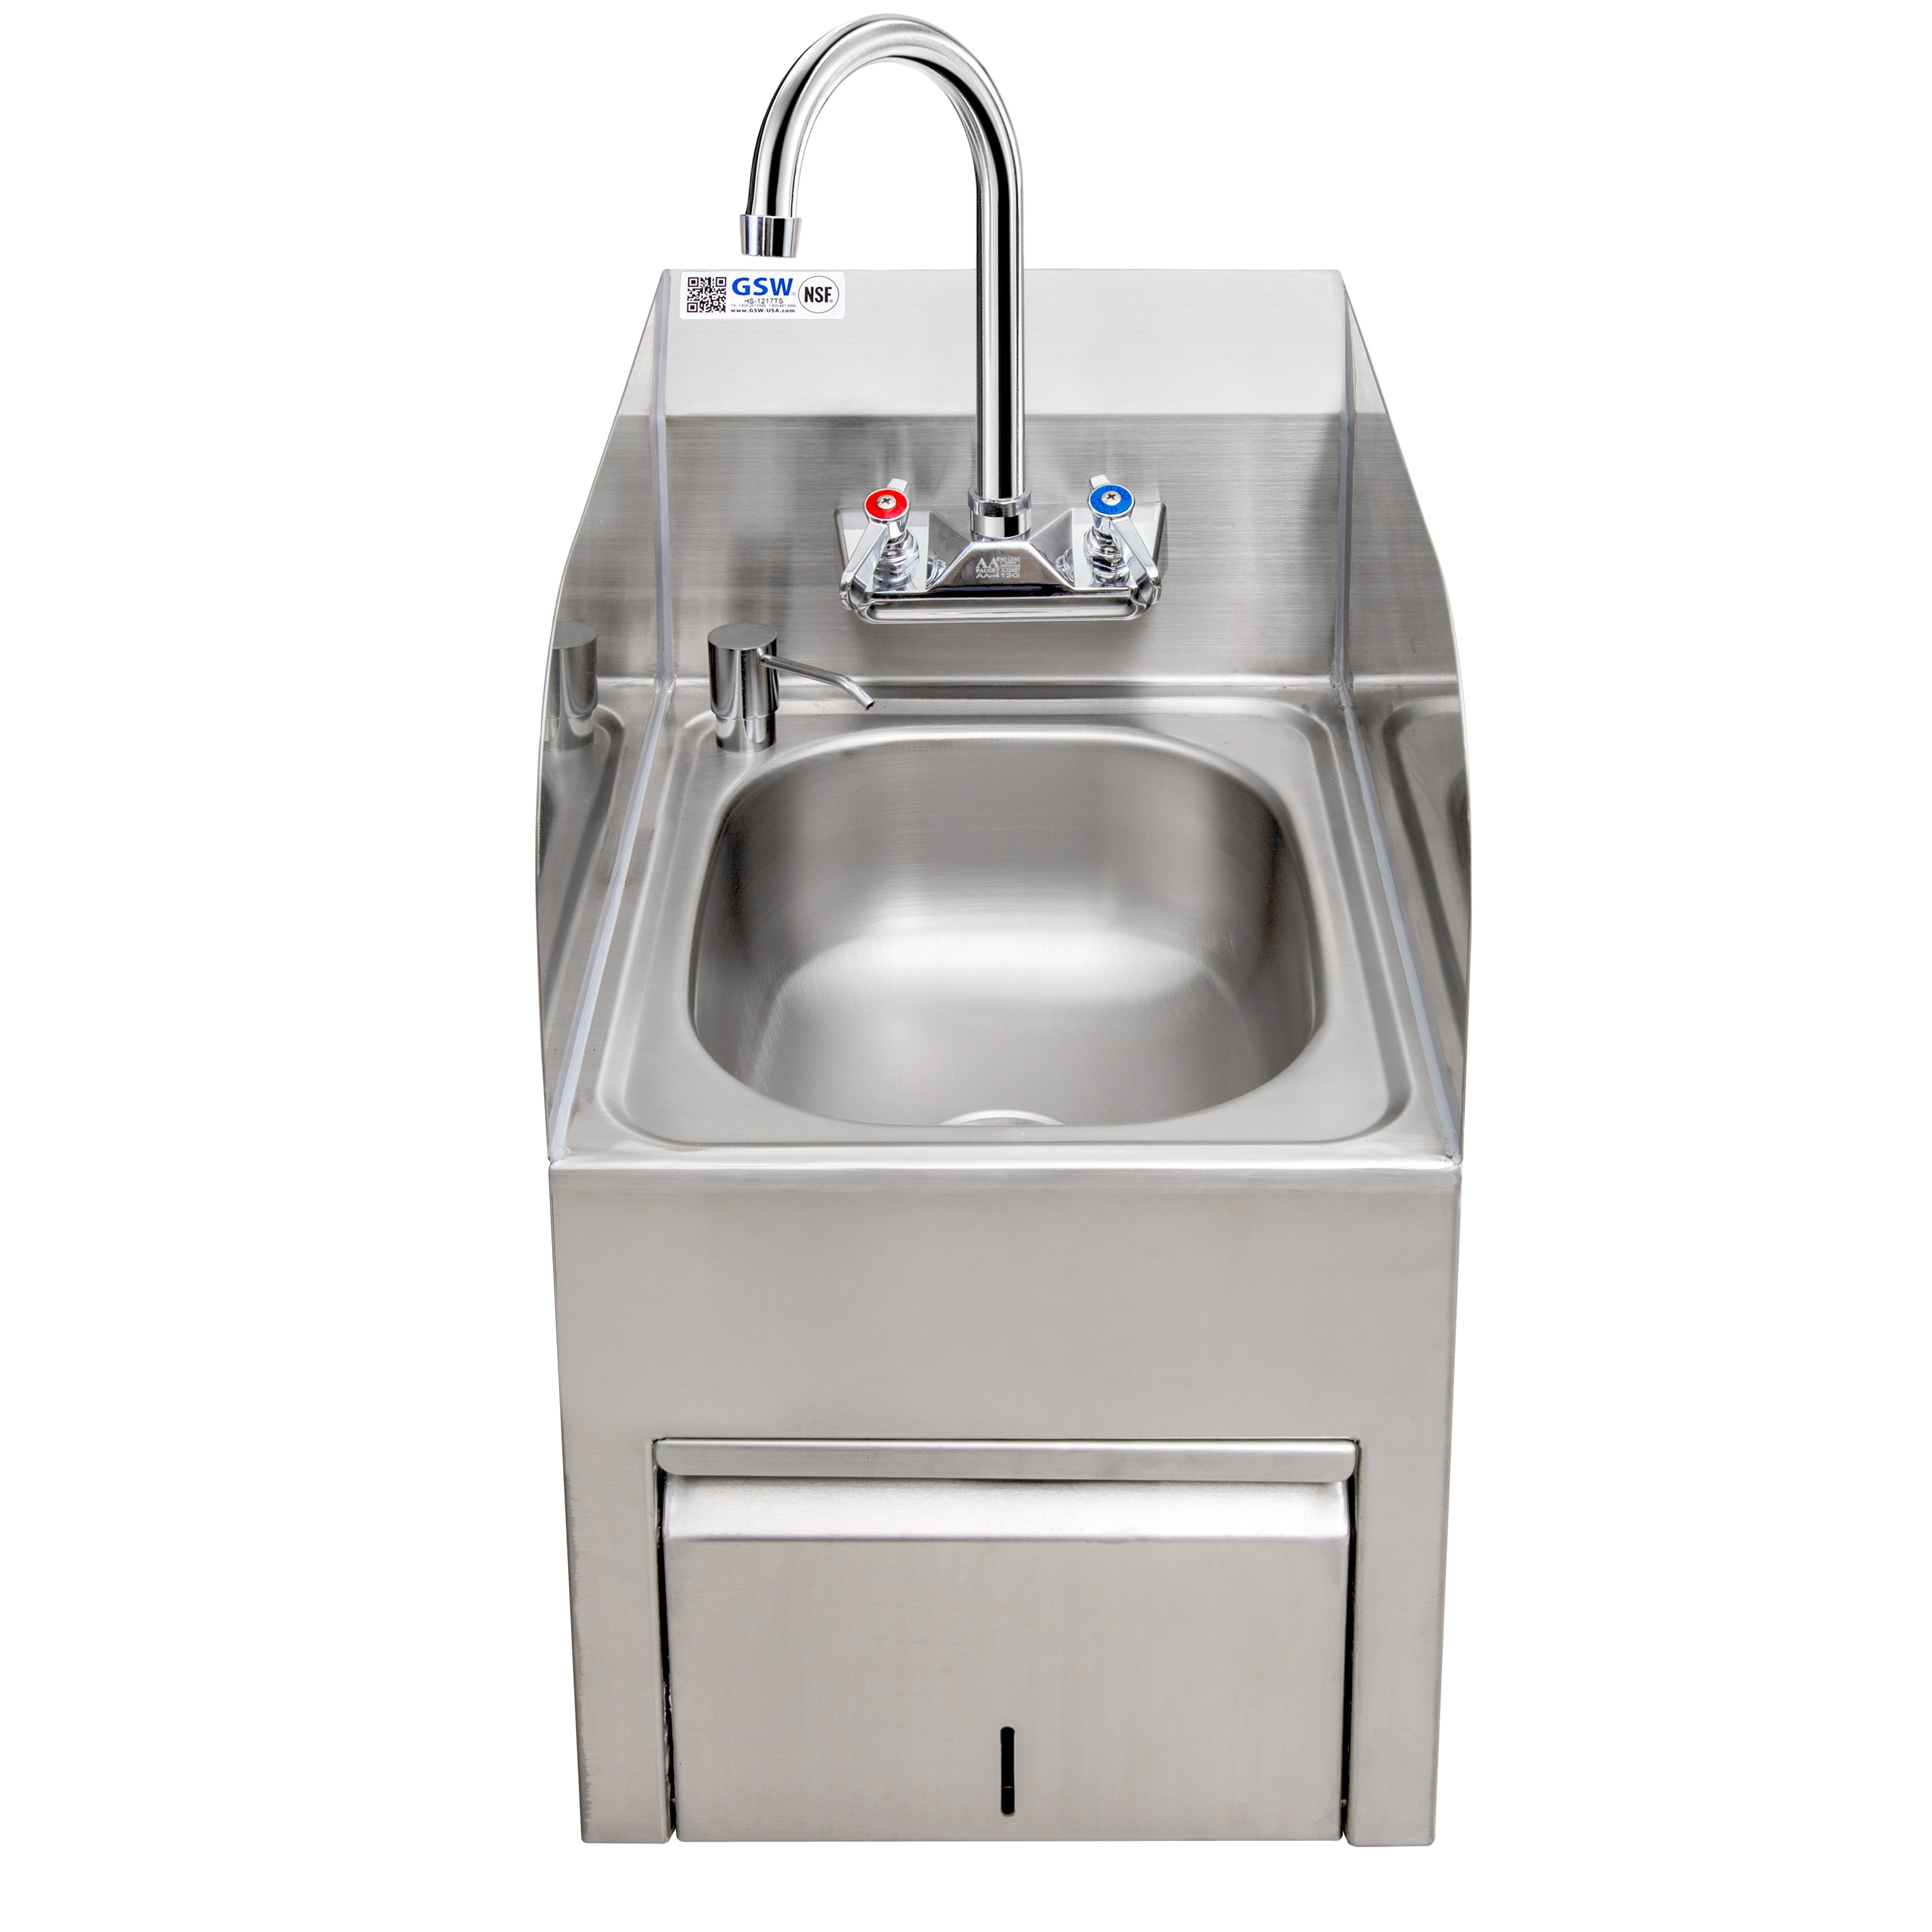 Splash Guard Hand Sink with Towel and Soap Dispenser, HS-1217TS